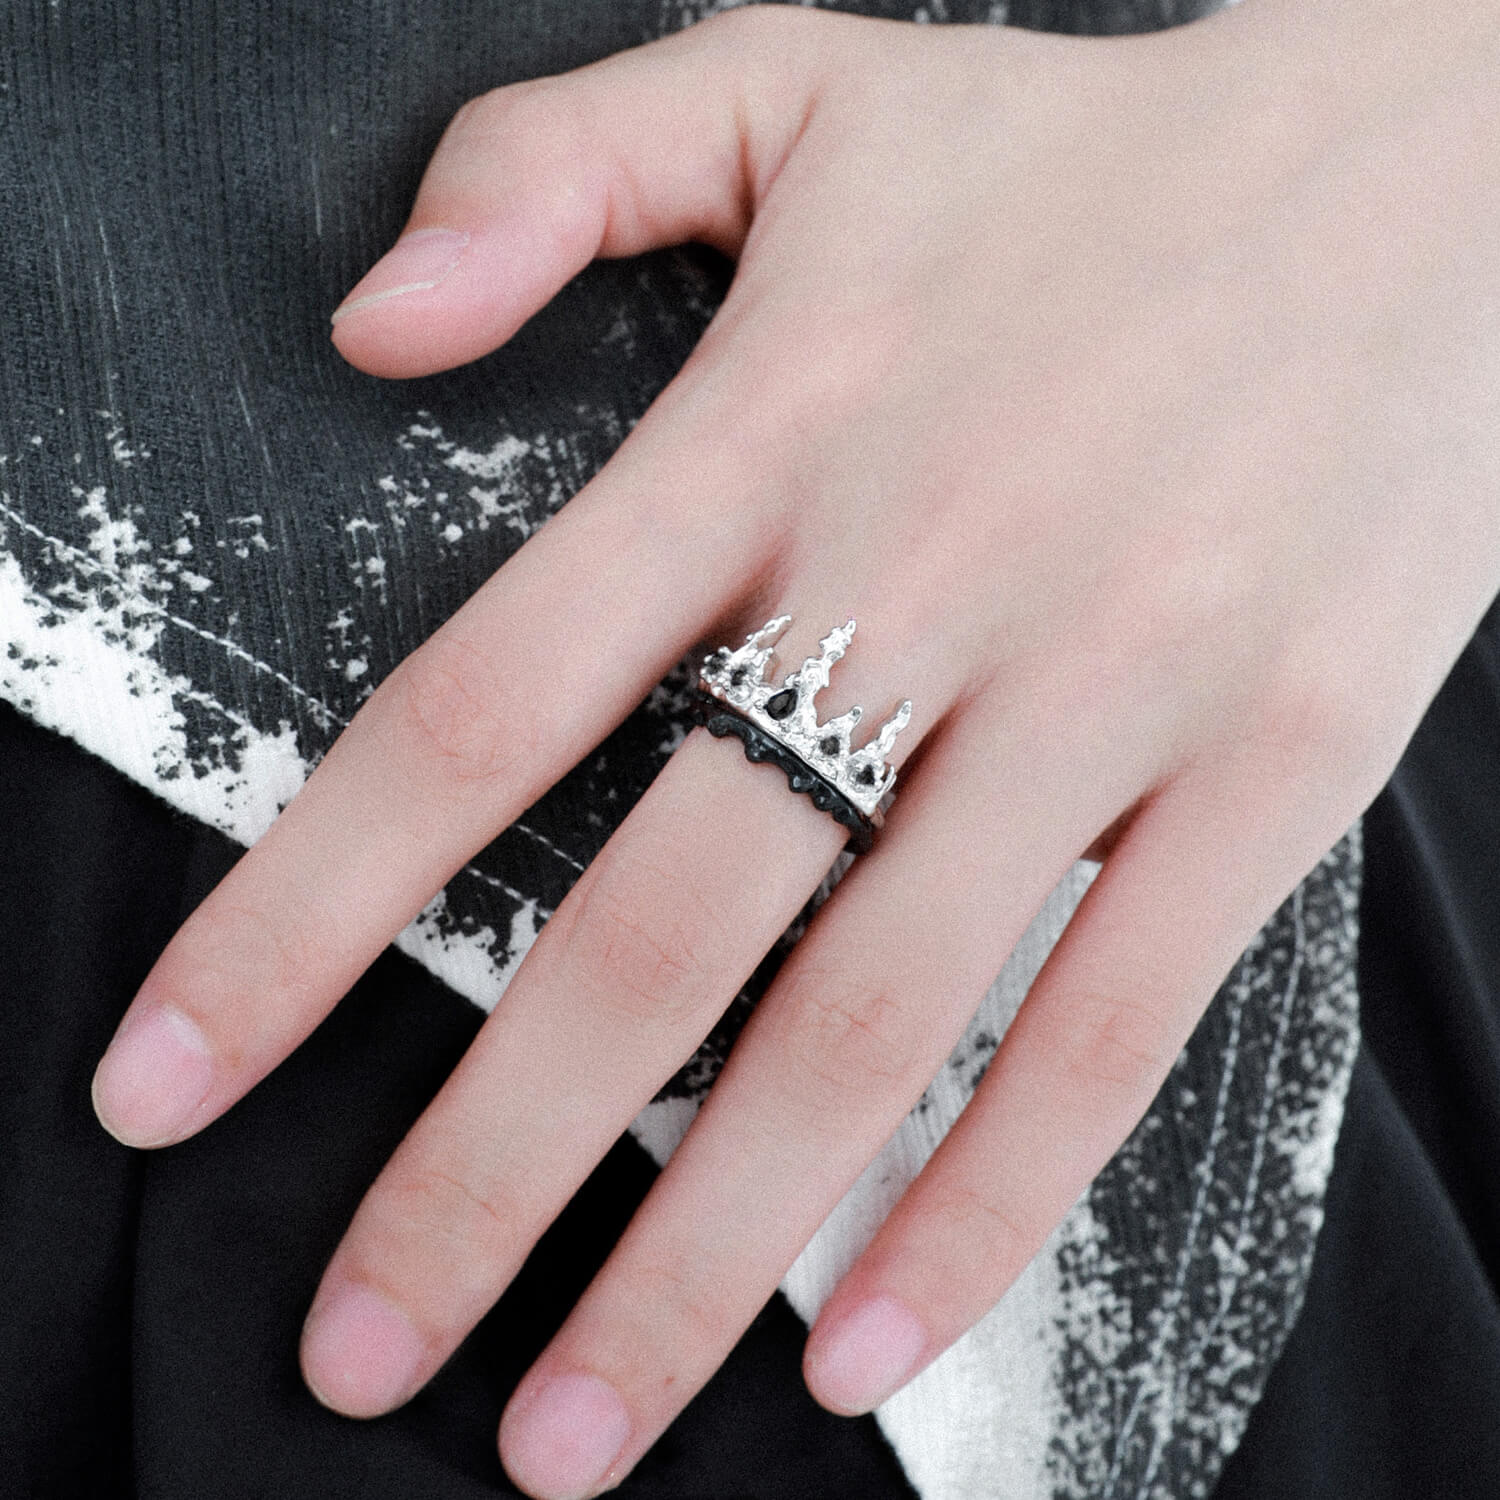 This stylish piece offers flexibility in styling. The ring can be disassembled into two distinct parts. The upper section, with its majestic crown, makes a bold statement on its own. Meanwhile, the lower part, in pure black, provides a sleek and modern option. Wear them separately to suit different occasions or together for a complete stylish look.